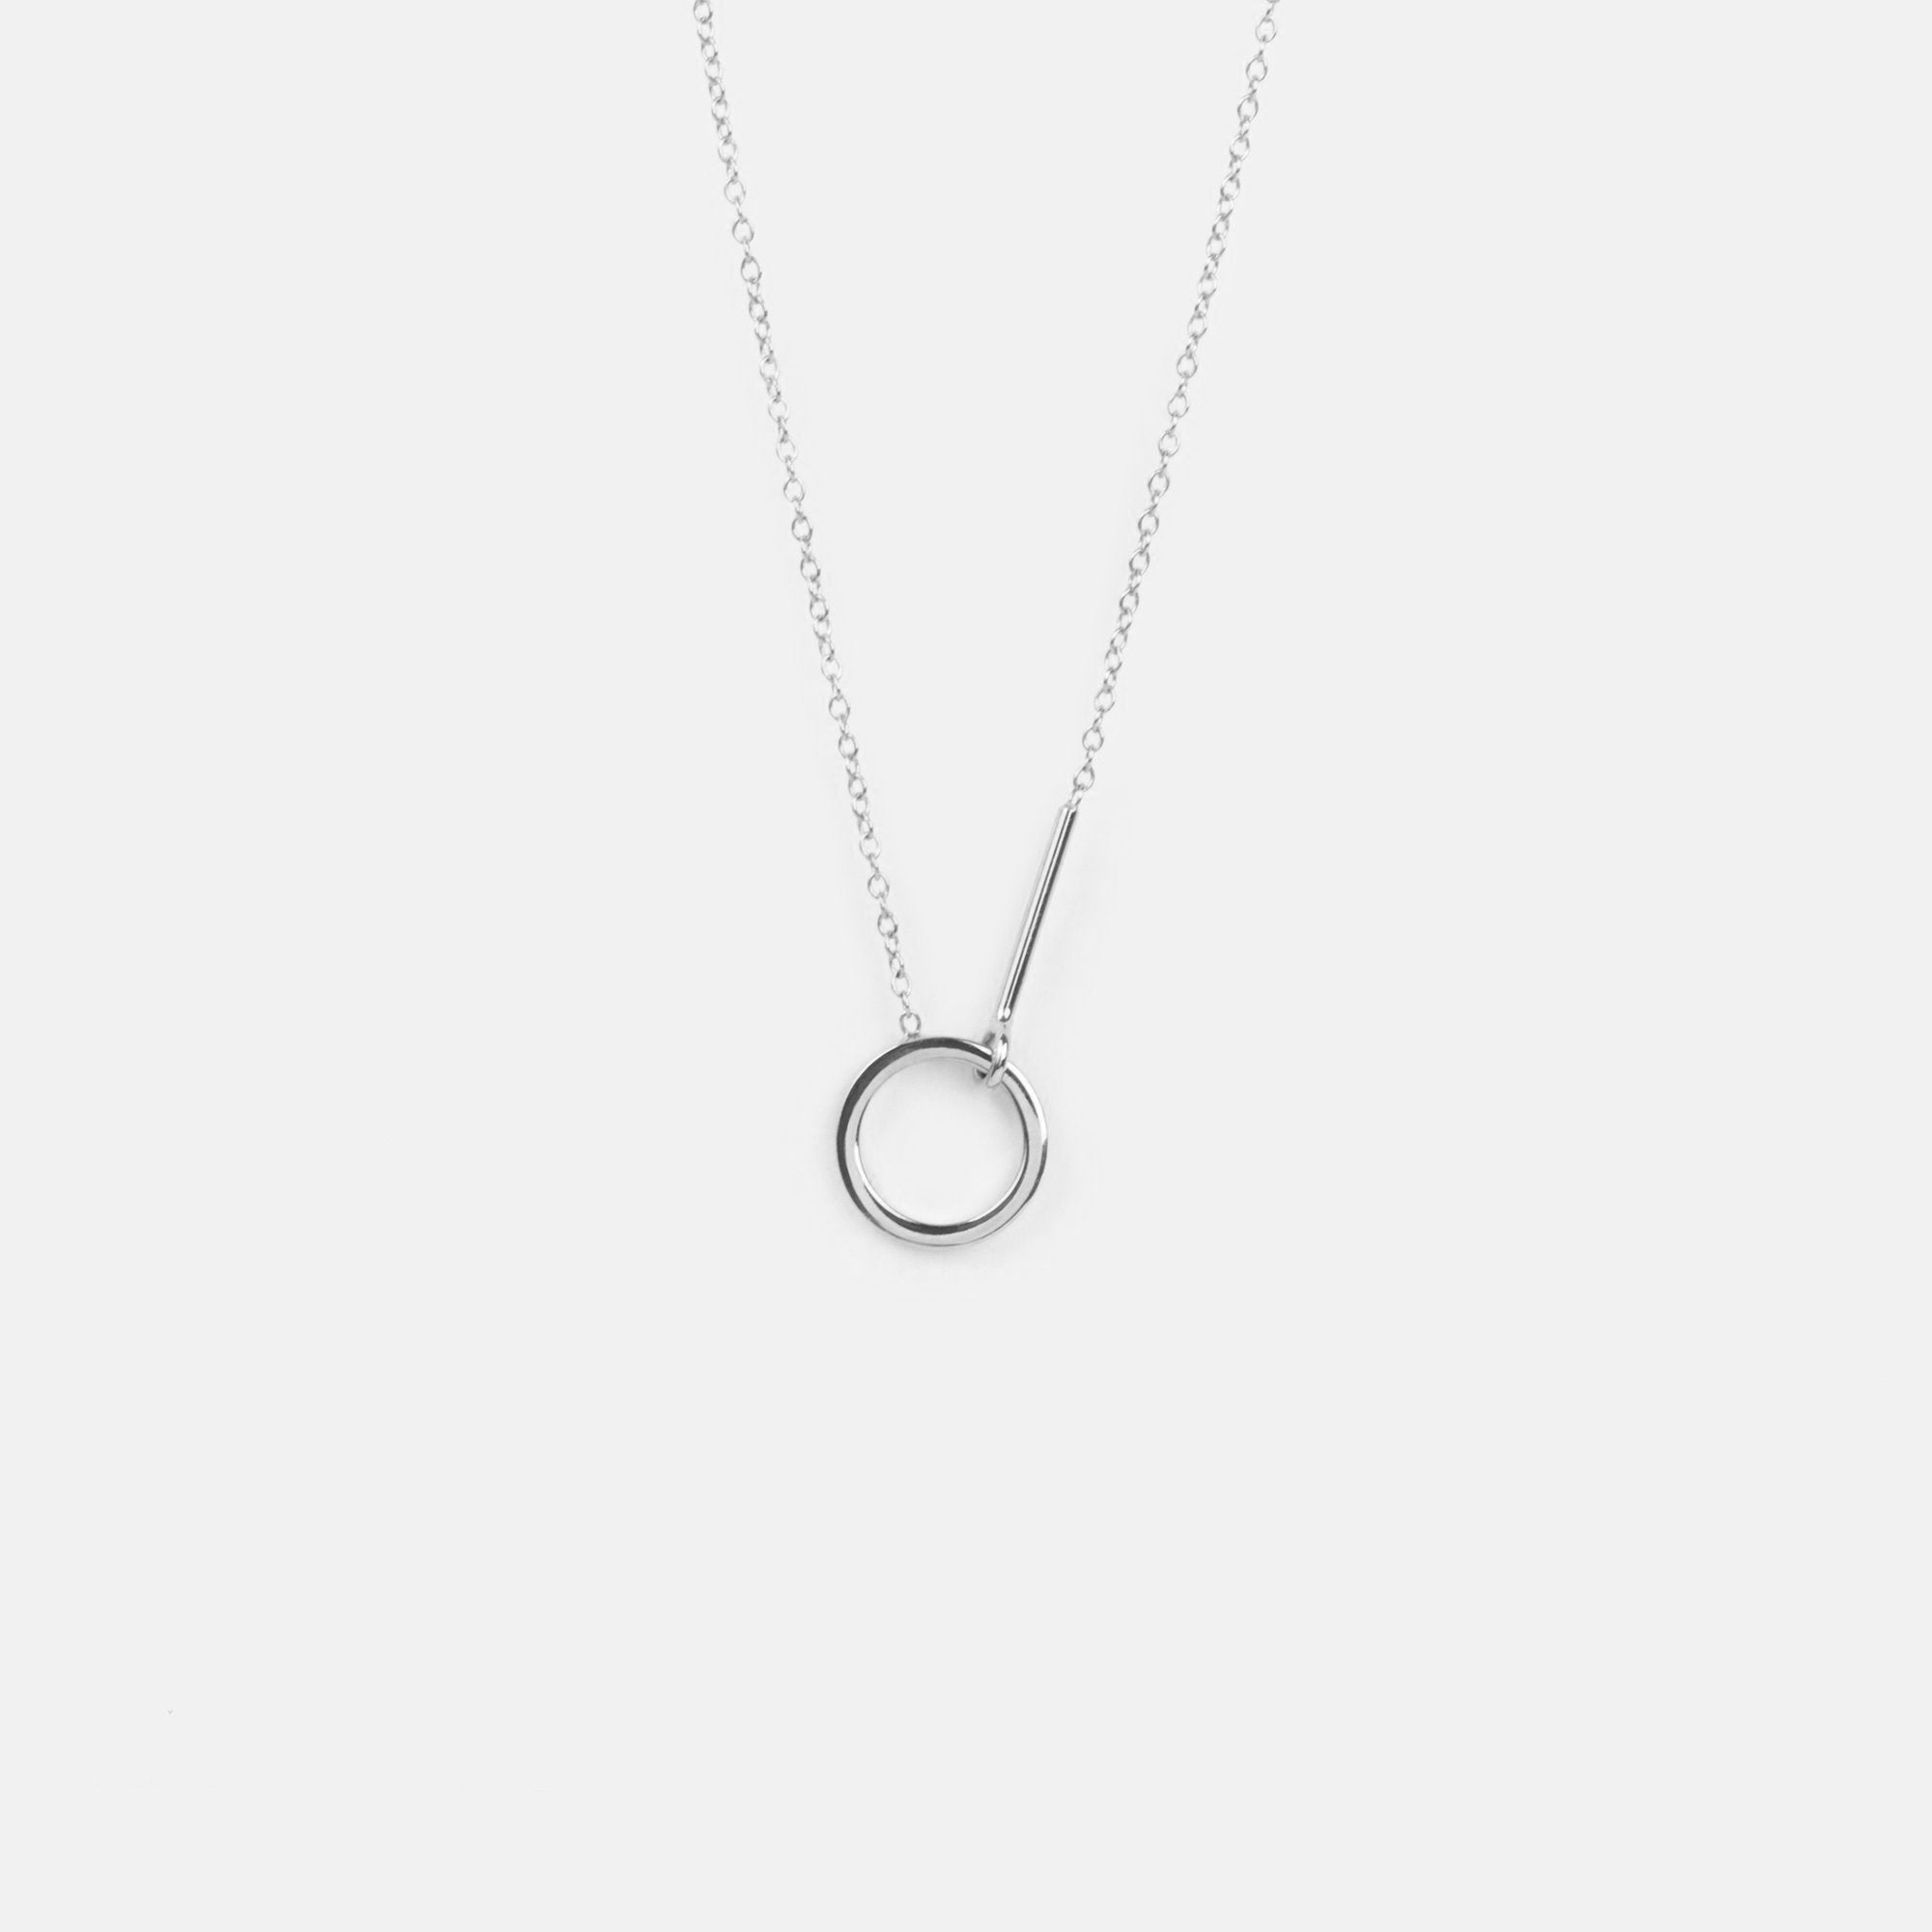 Visata Unisex Necklace in 14k White Gold By SHW Fine Jewelry NYC